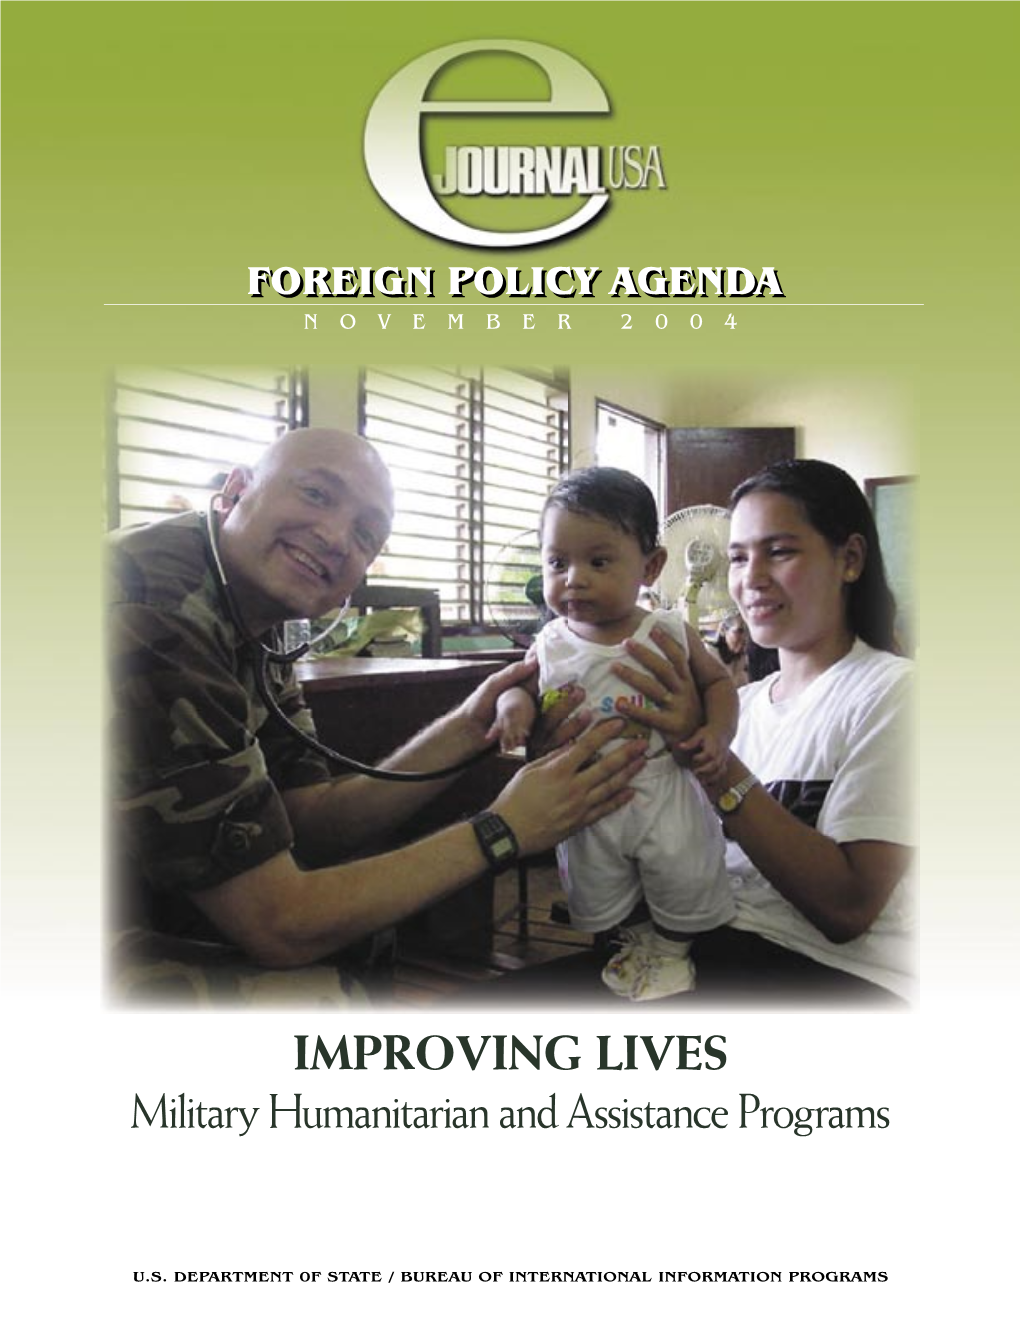 Military Humanitarian and Assistance Programs